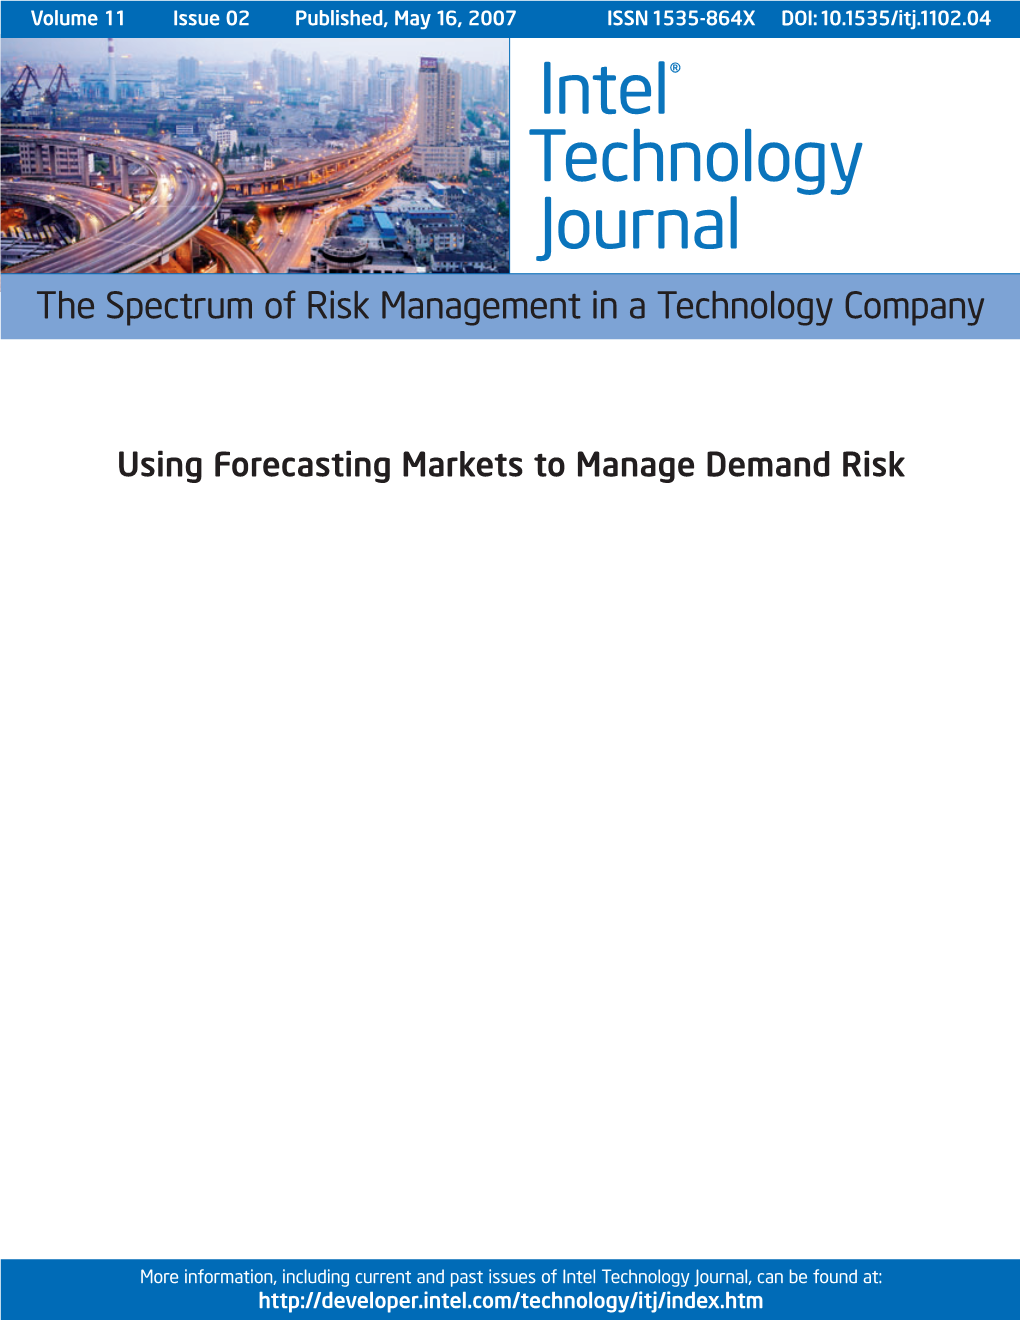 Intel® Technology Journal the Spectrum of Risk Management in a Technology Company